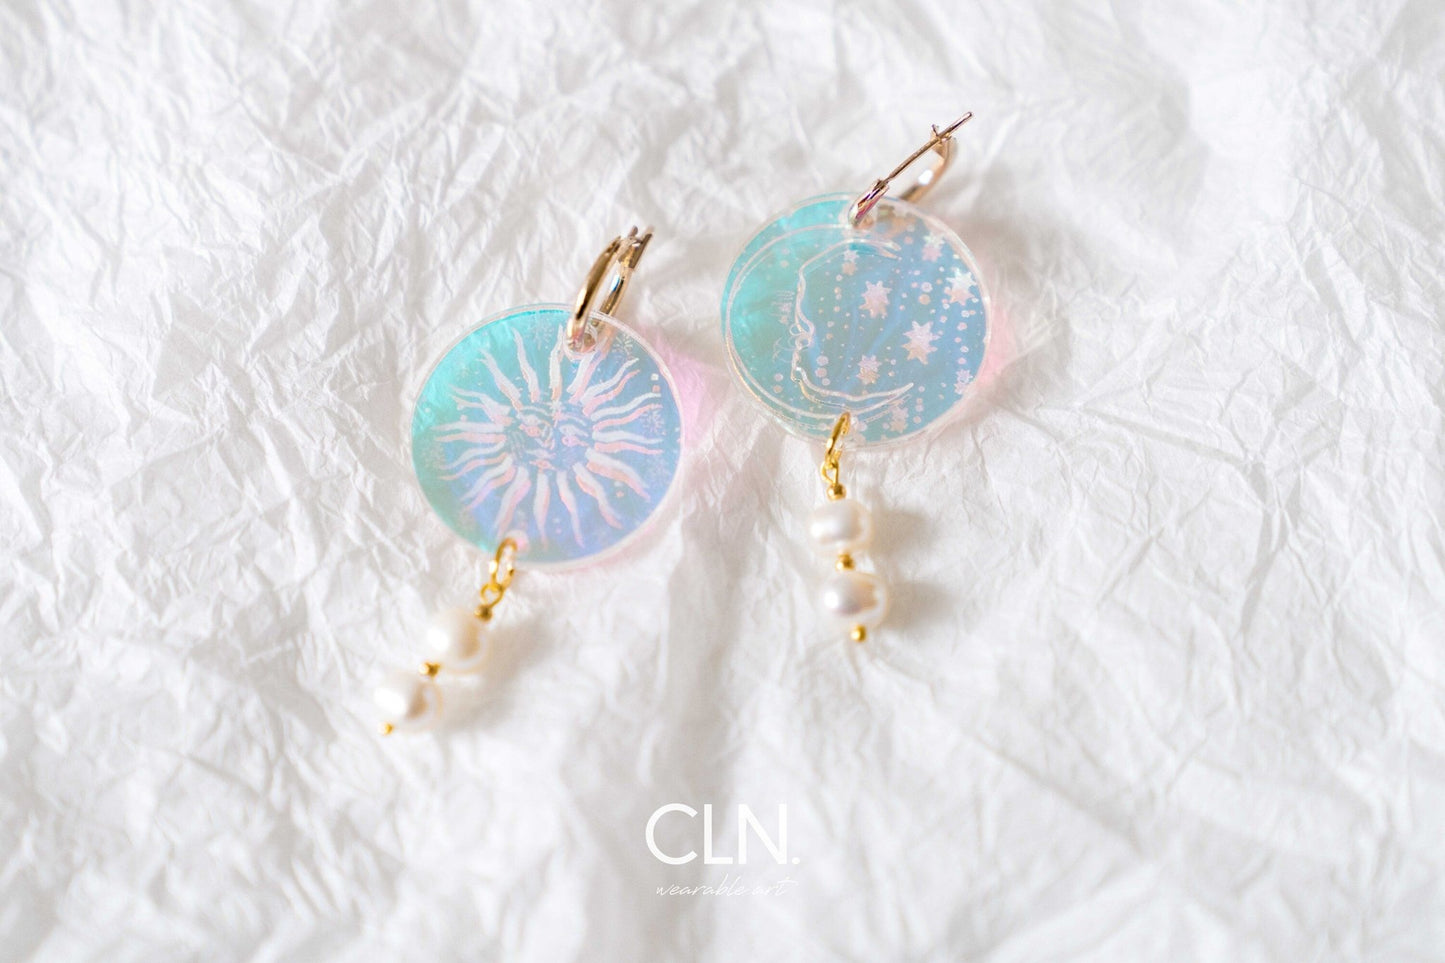 The sun and moon duo - Earrings - CLN Atelier